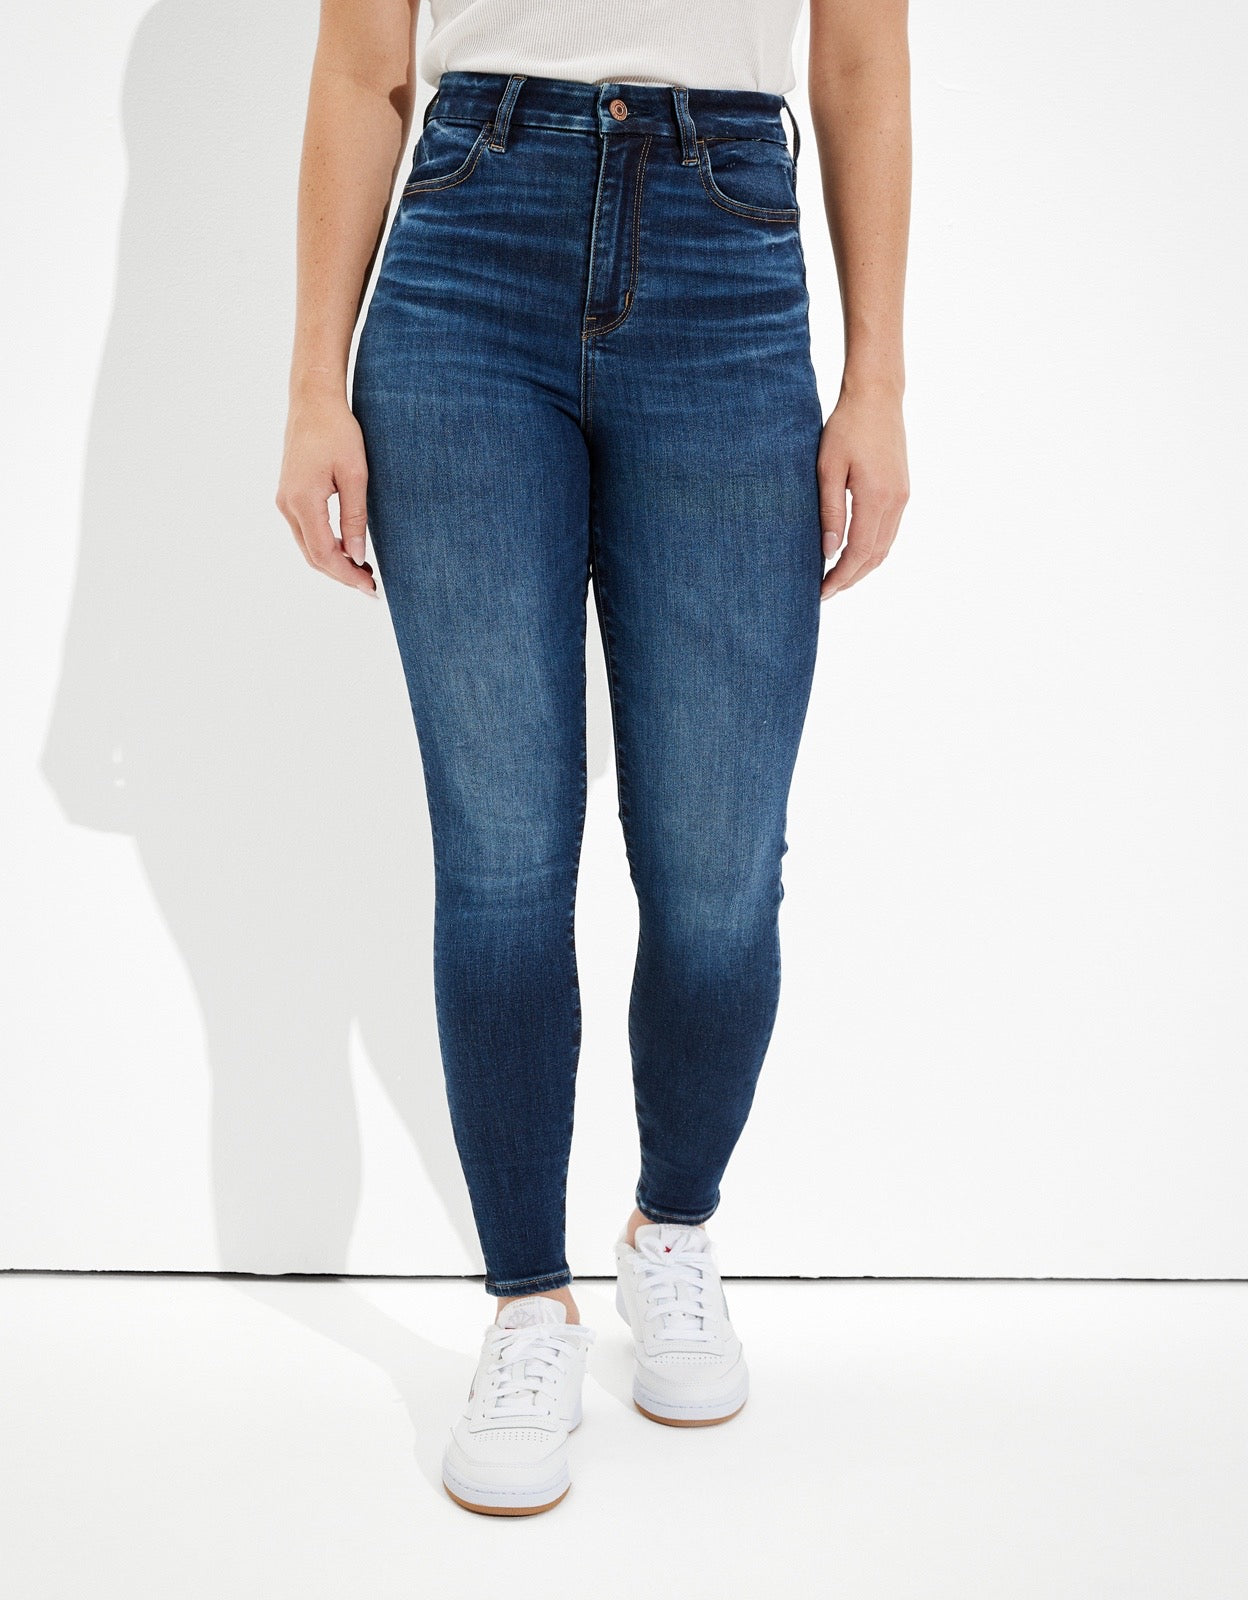 American Eagle The Dream Jean Curvy Super High-Waisted Jegging